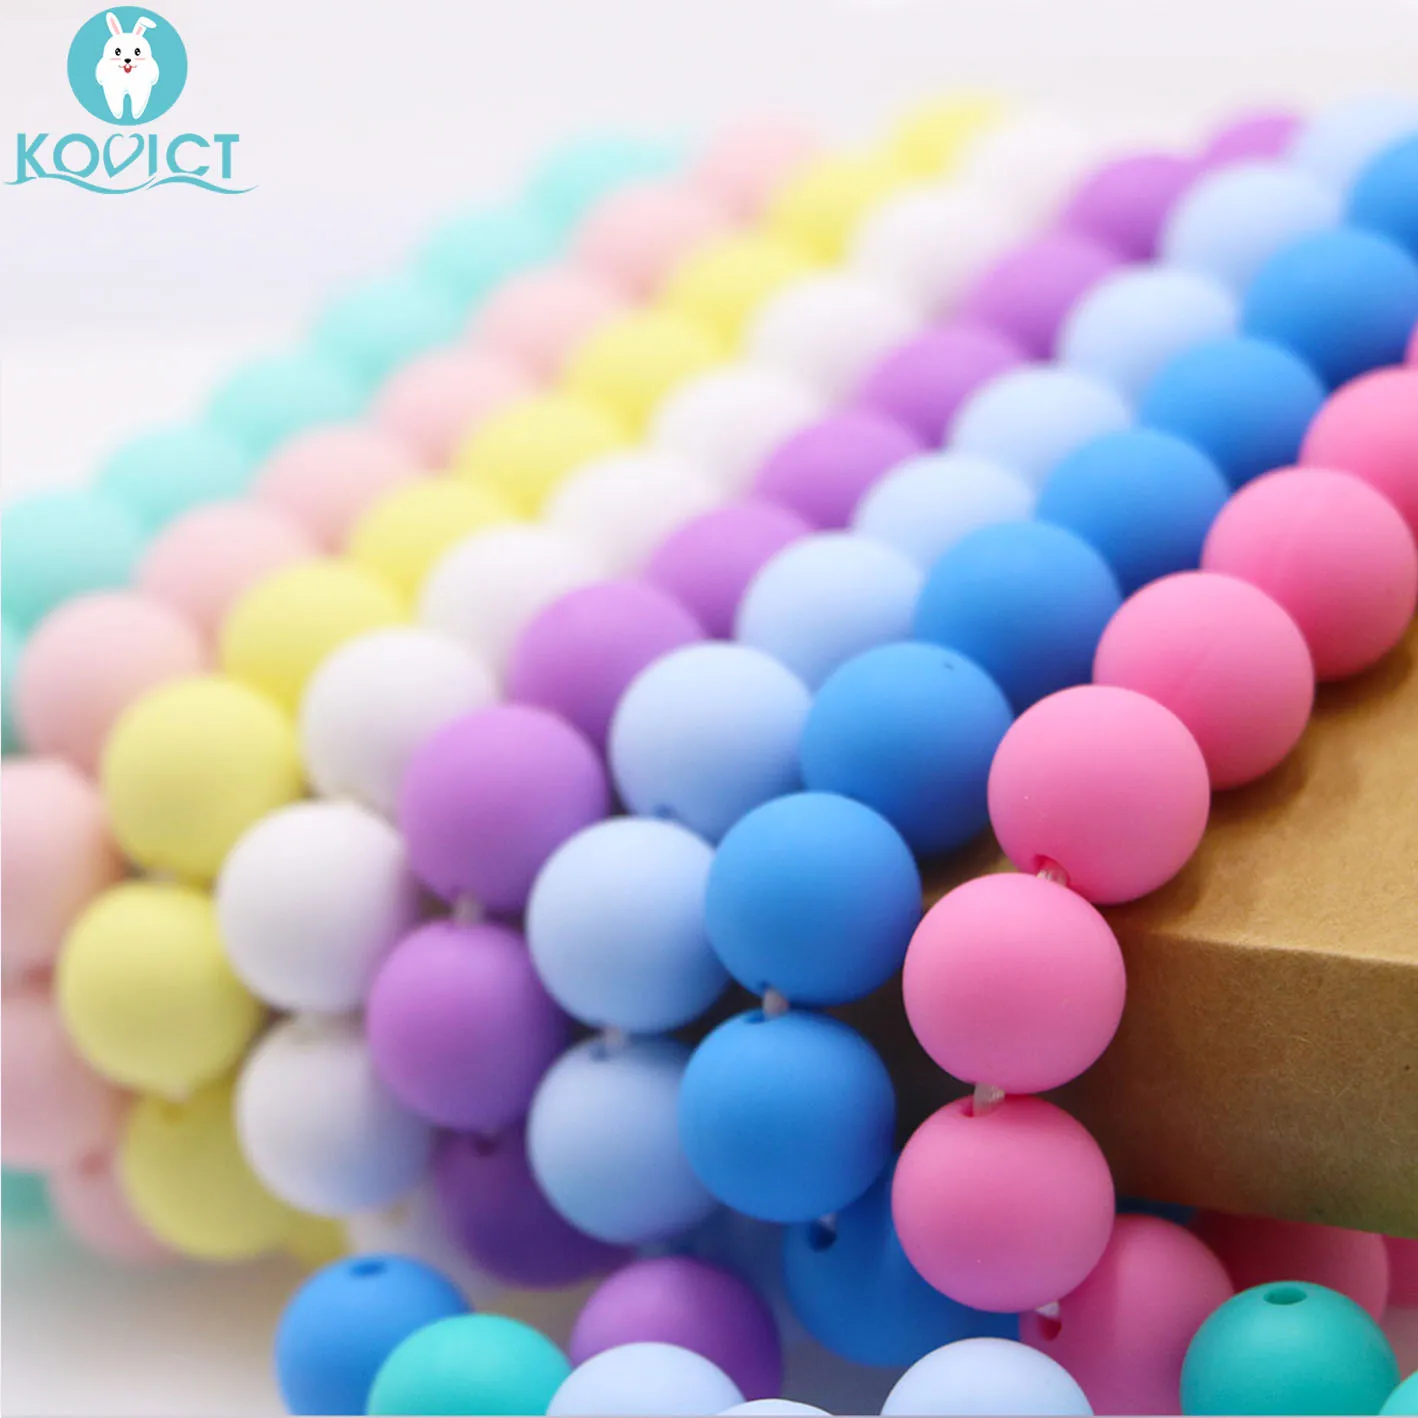 Kovict 50pcs Round Silicone Beads 12mm Baby Teether 